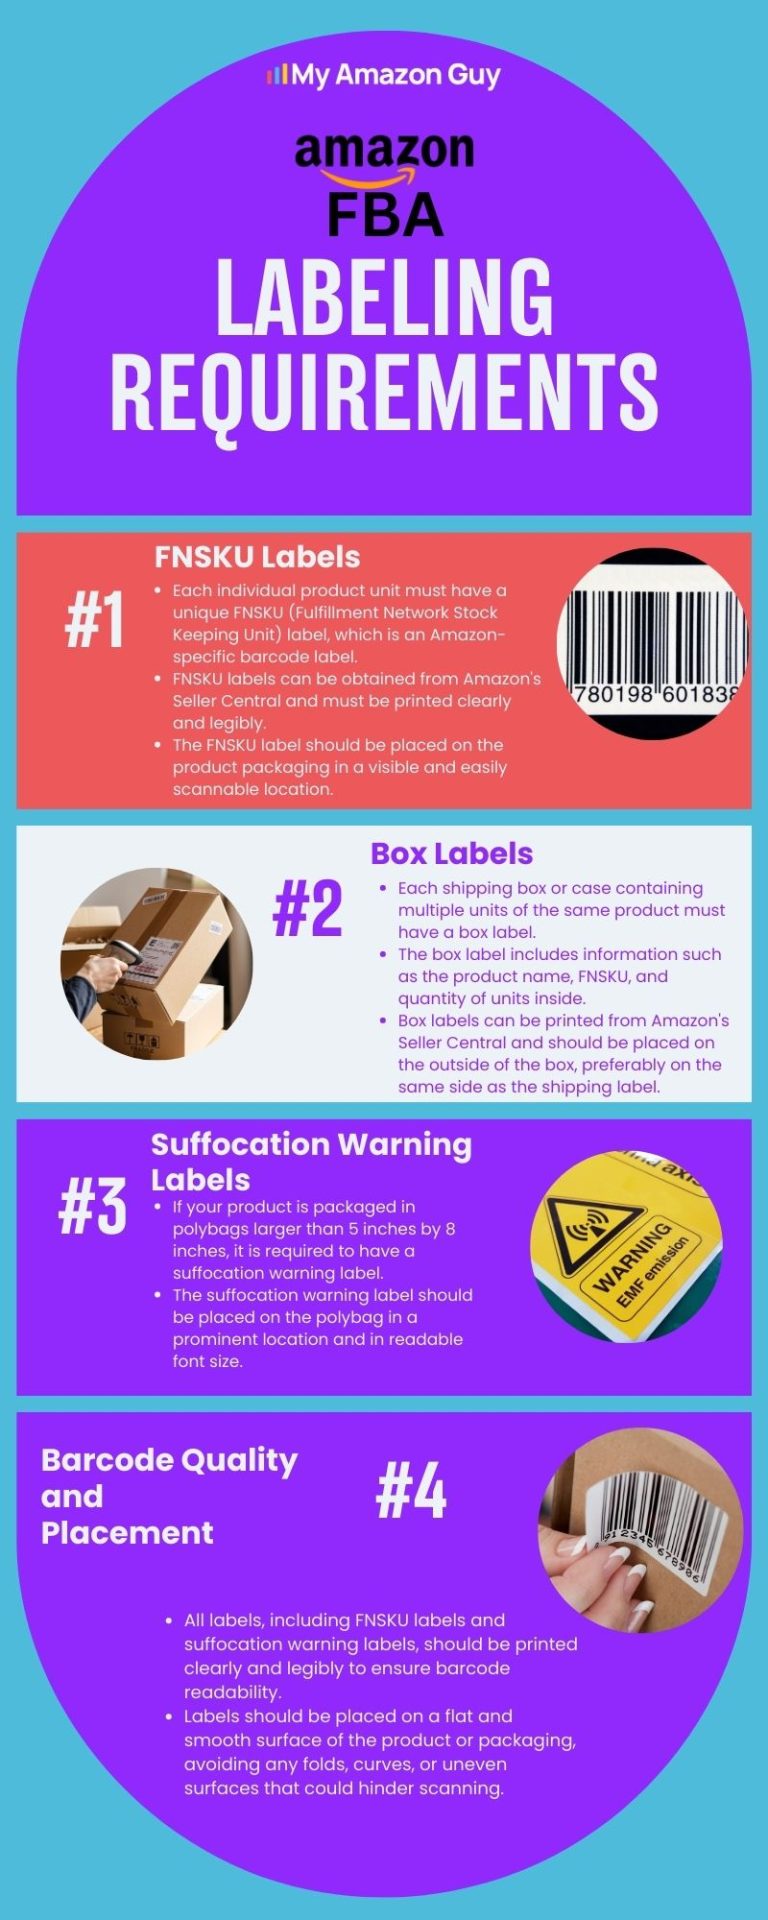 Amazon FBA Shipping and Logistics - Label Requirements